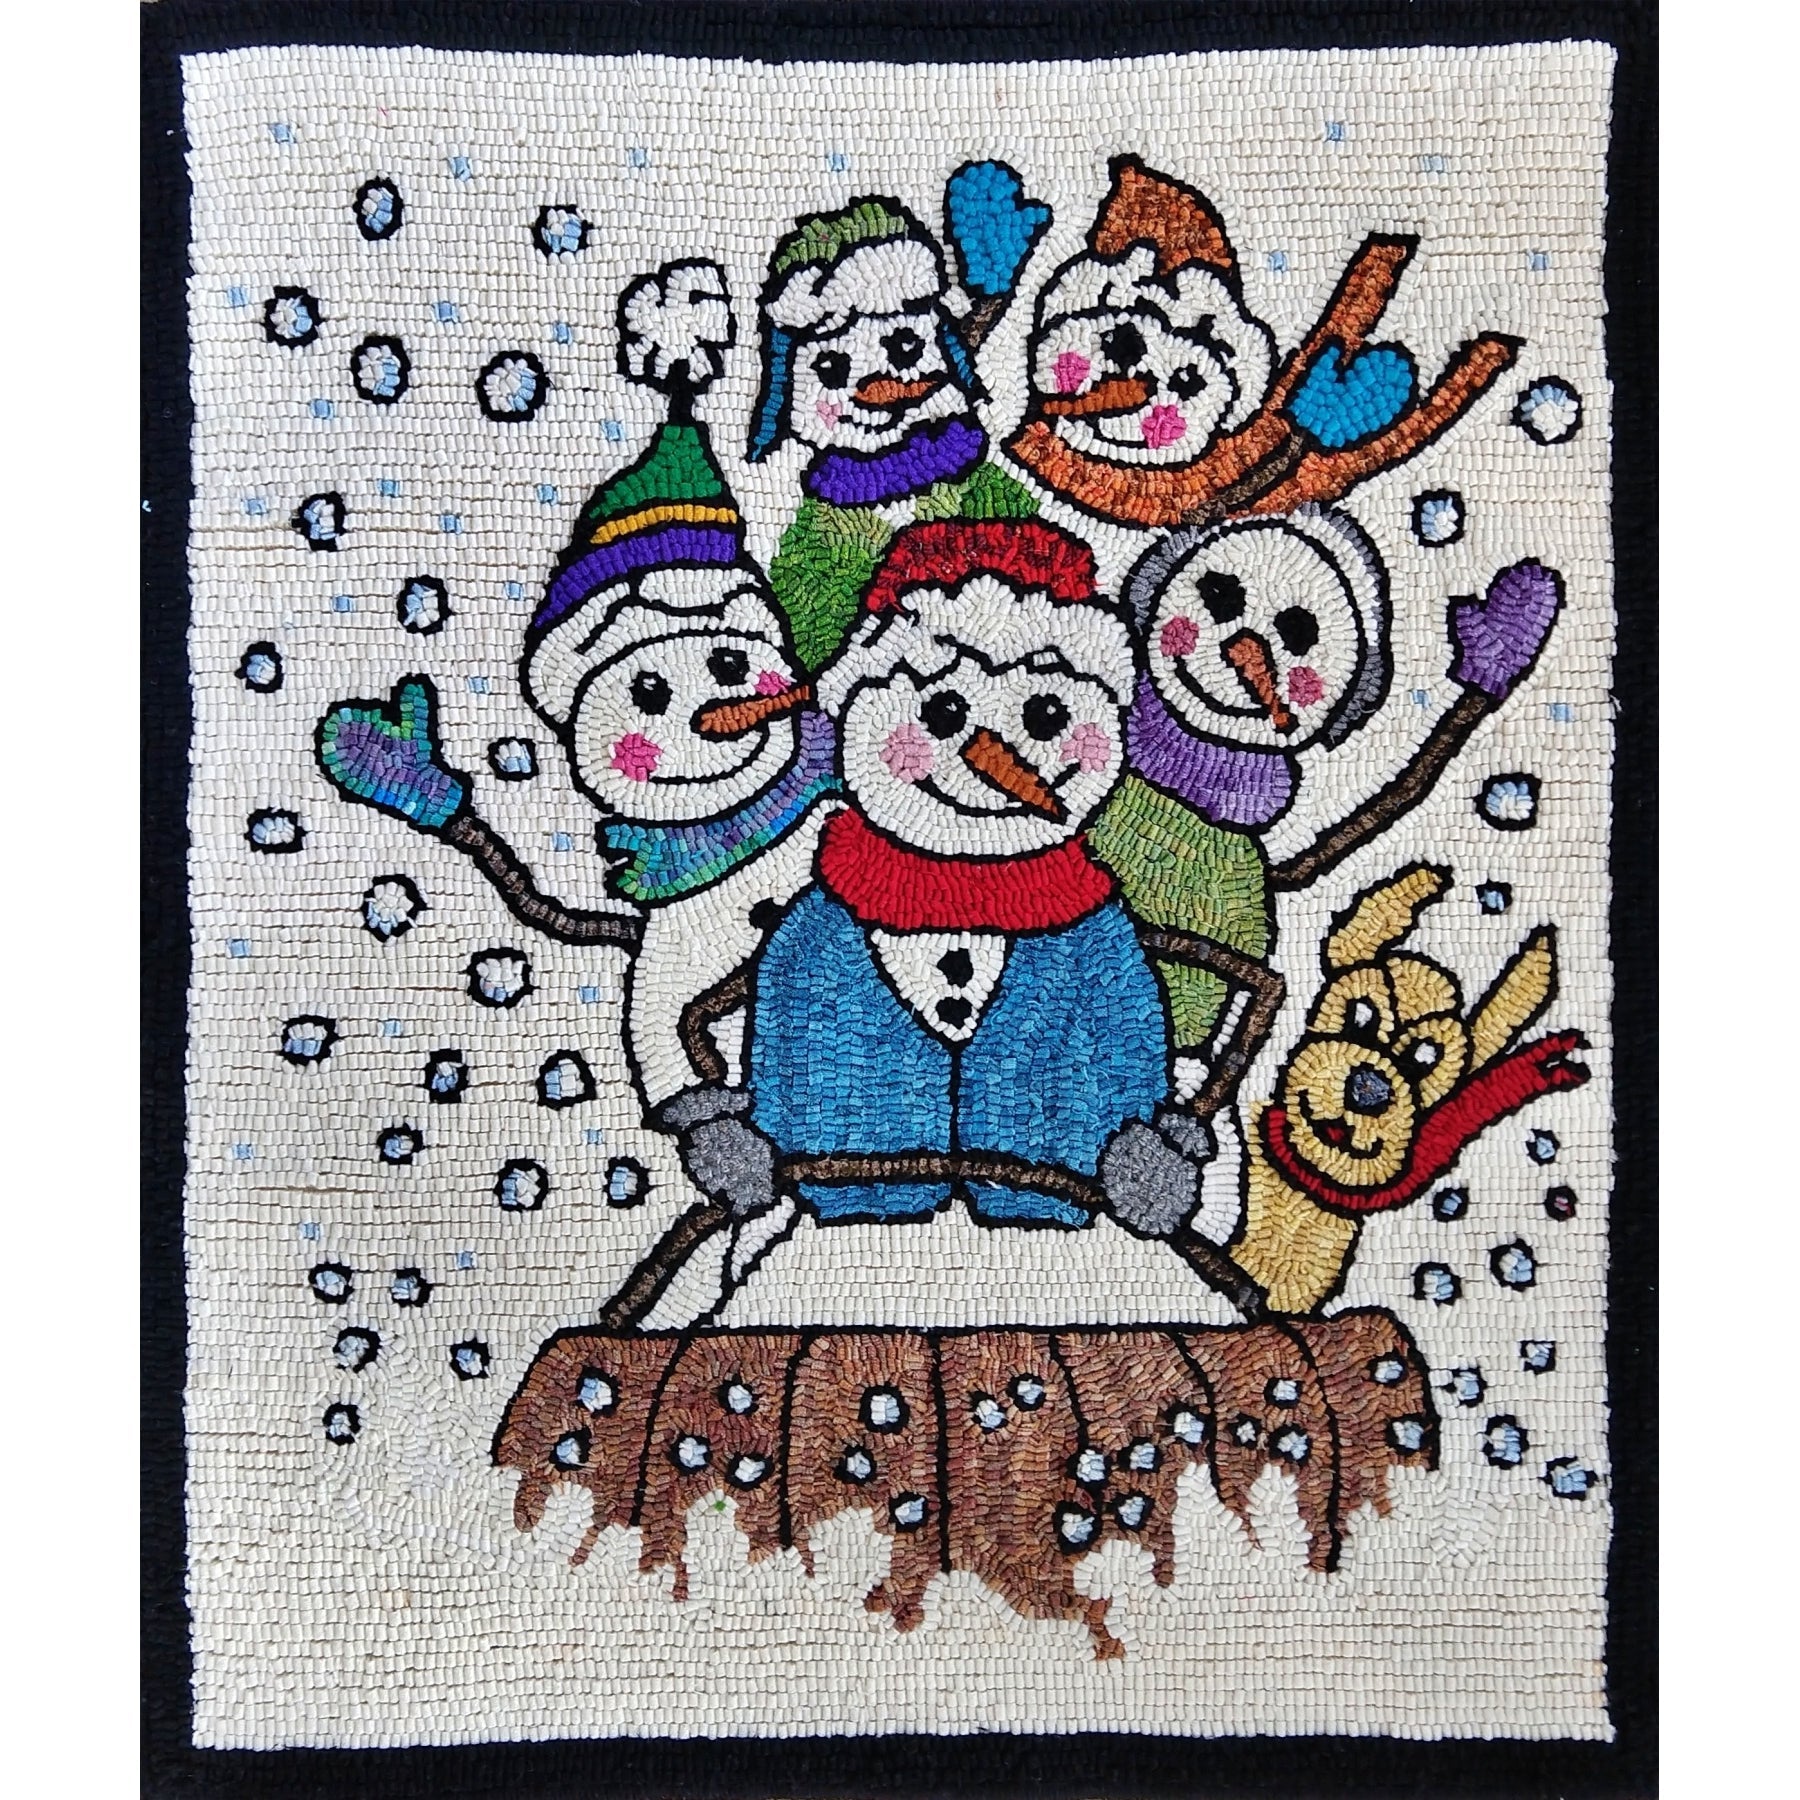 Dashing through the Snow, rug hooked by Liz Crouch